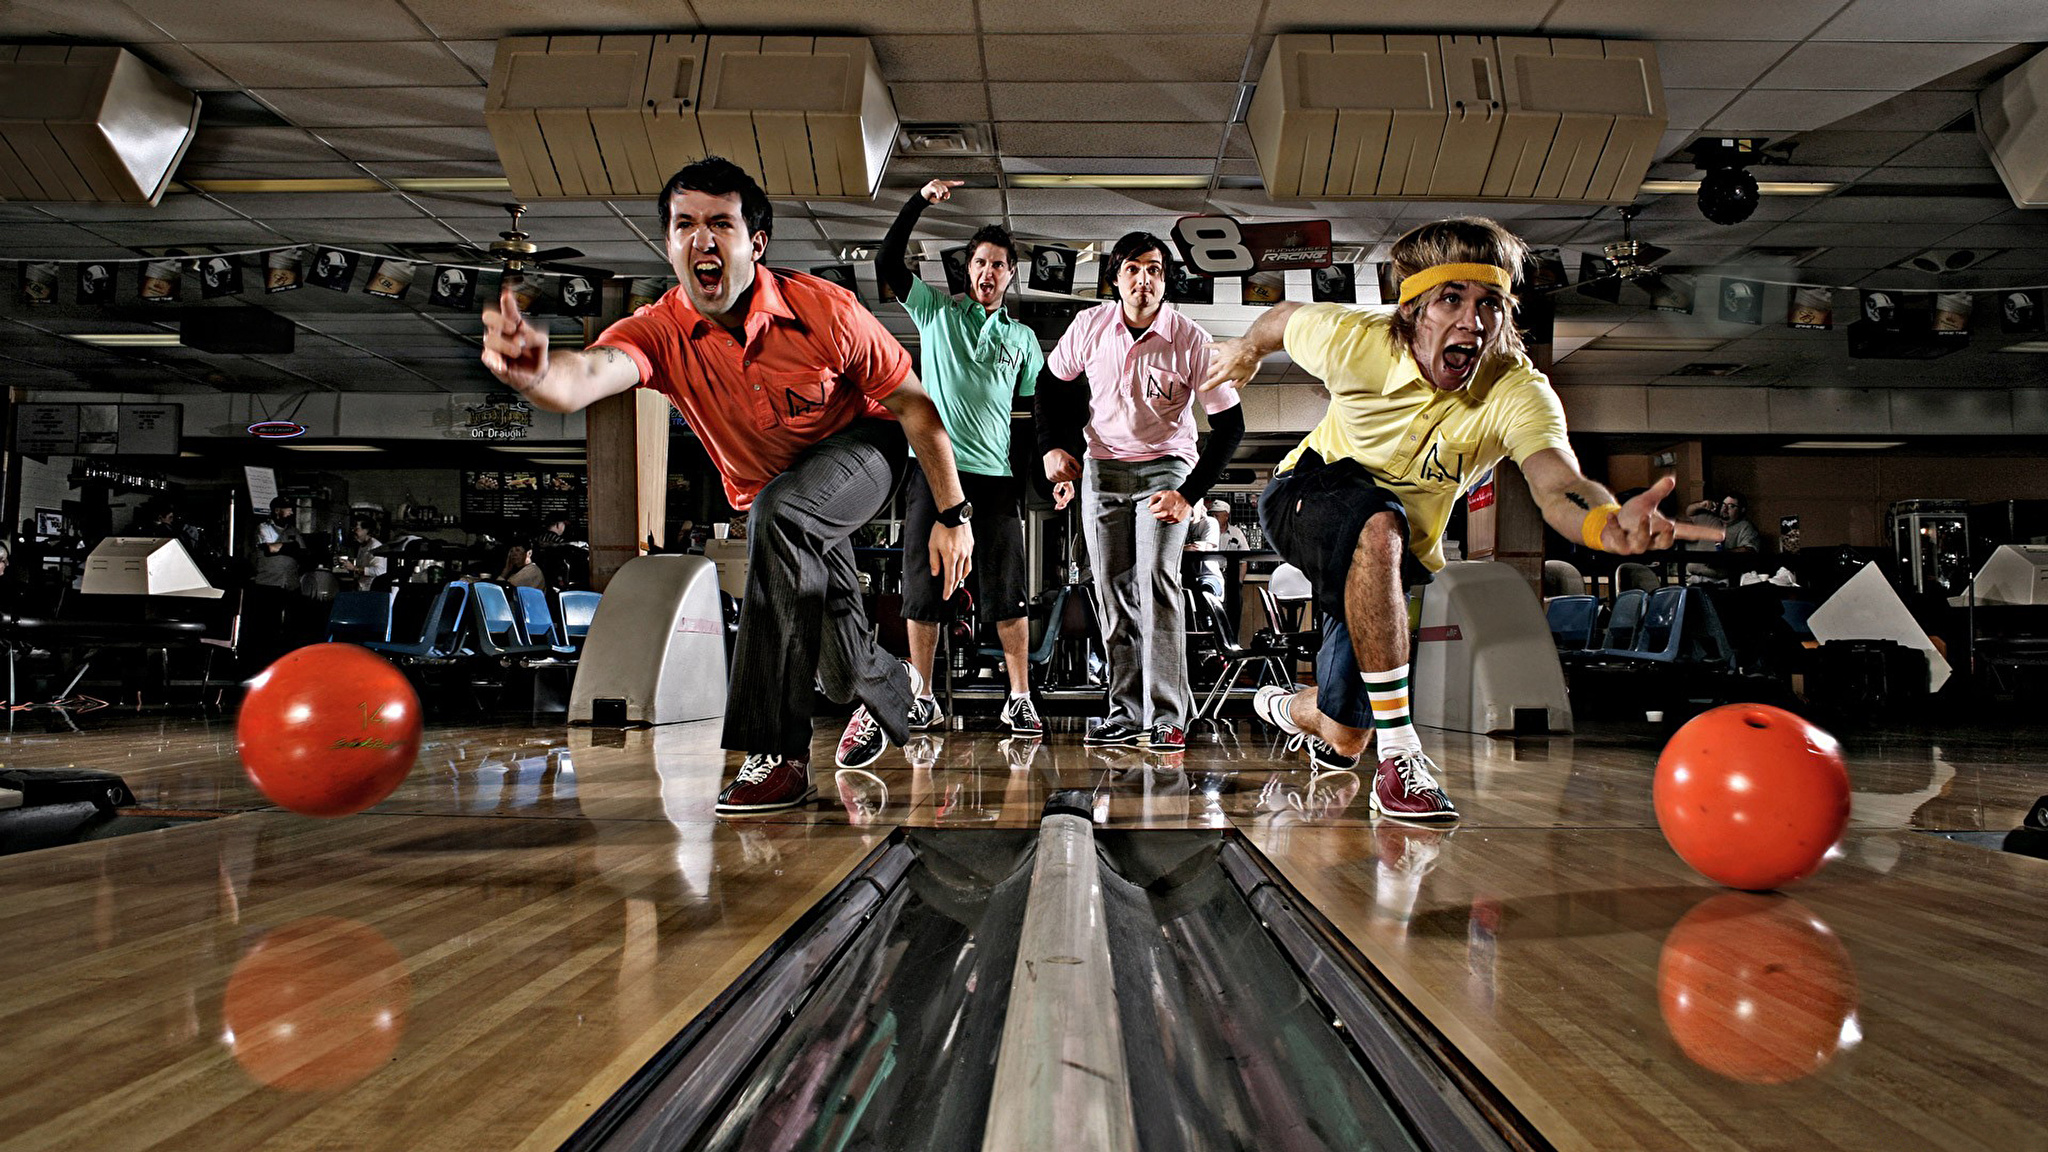 Bowling competition photo